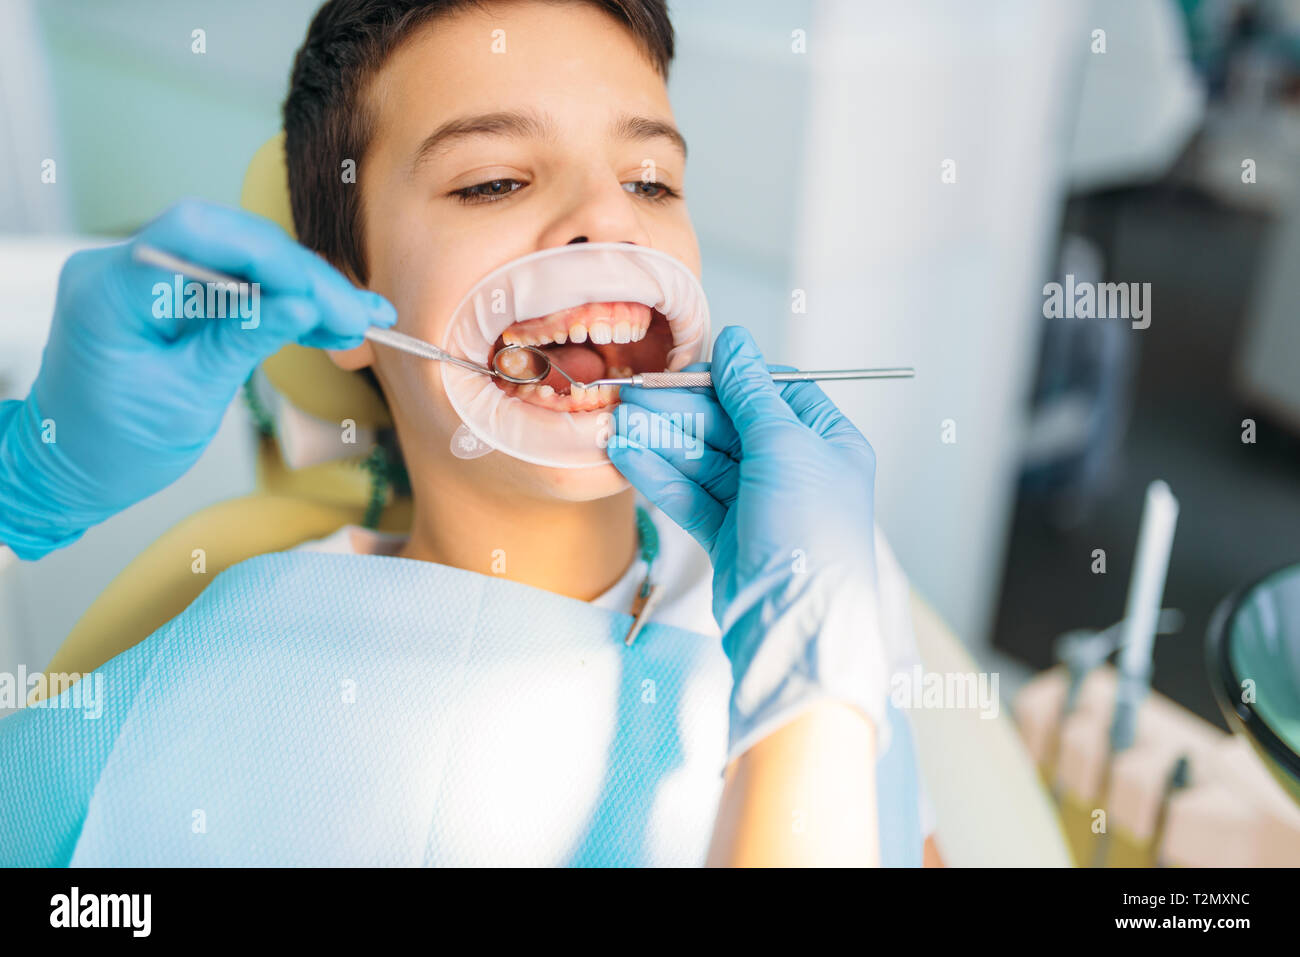 Little Boy With Open Mouth In A Dental Cabinet Caries Removal Procedure Pediatric Dentistry Female Dentist Looking For Caries Stock Photo Alamy